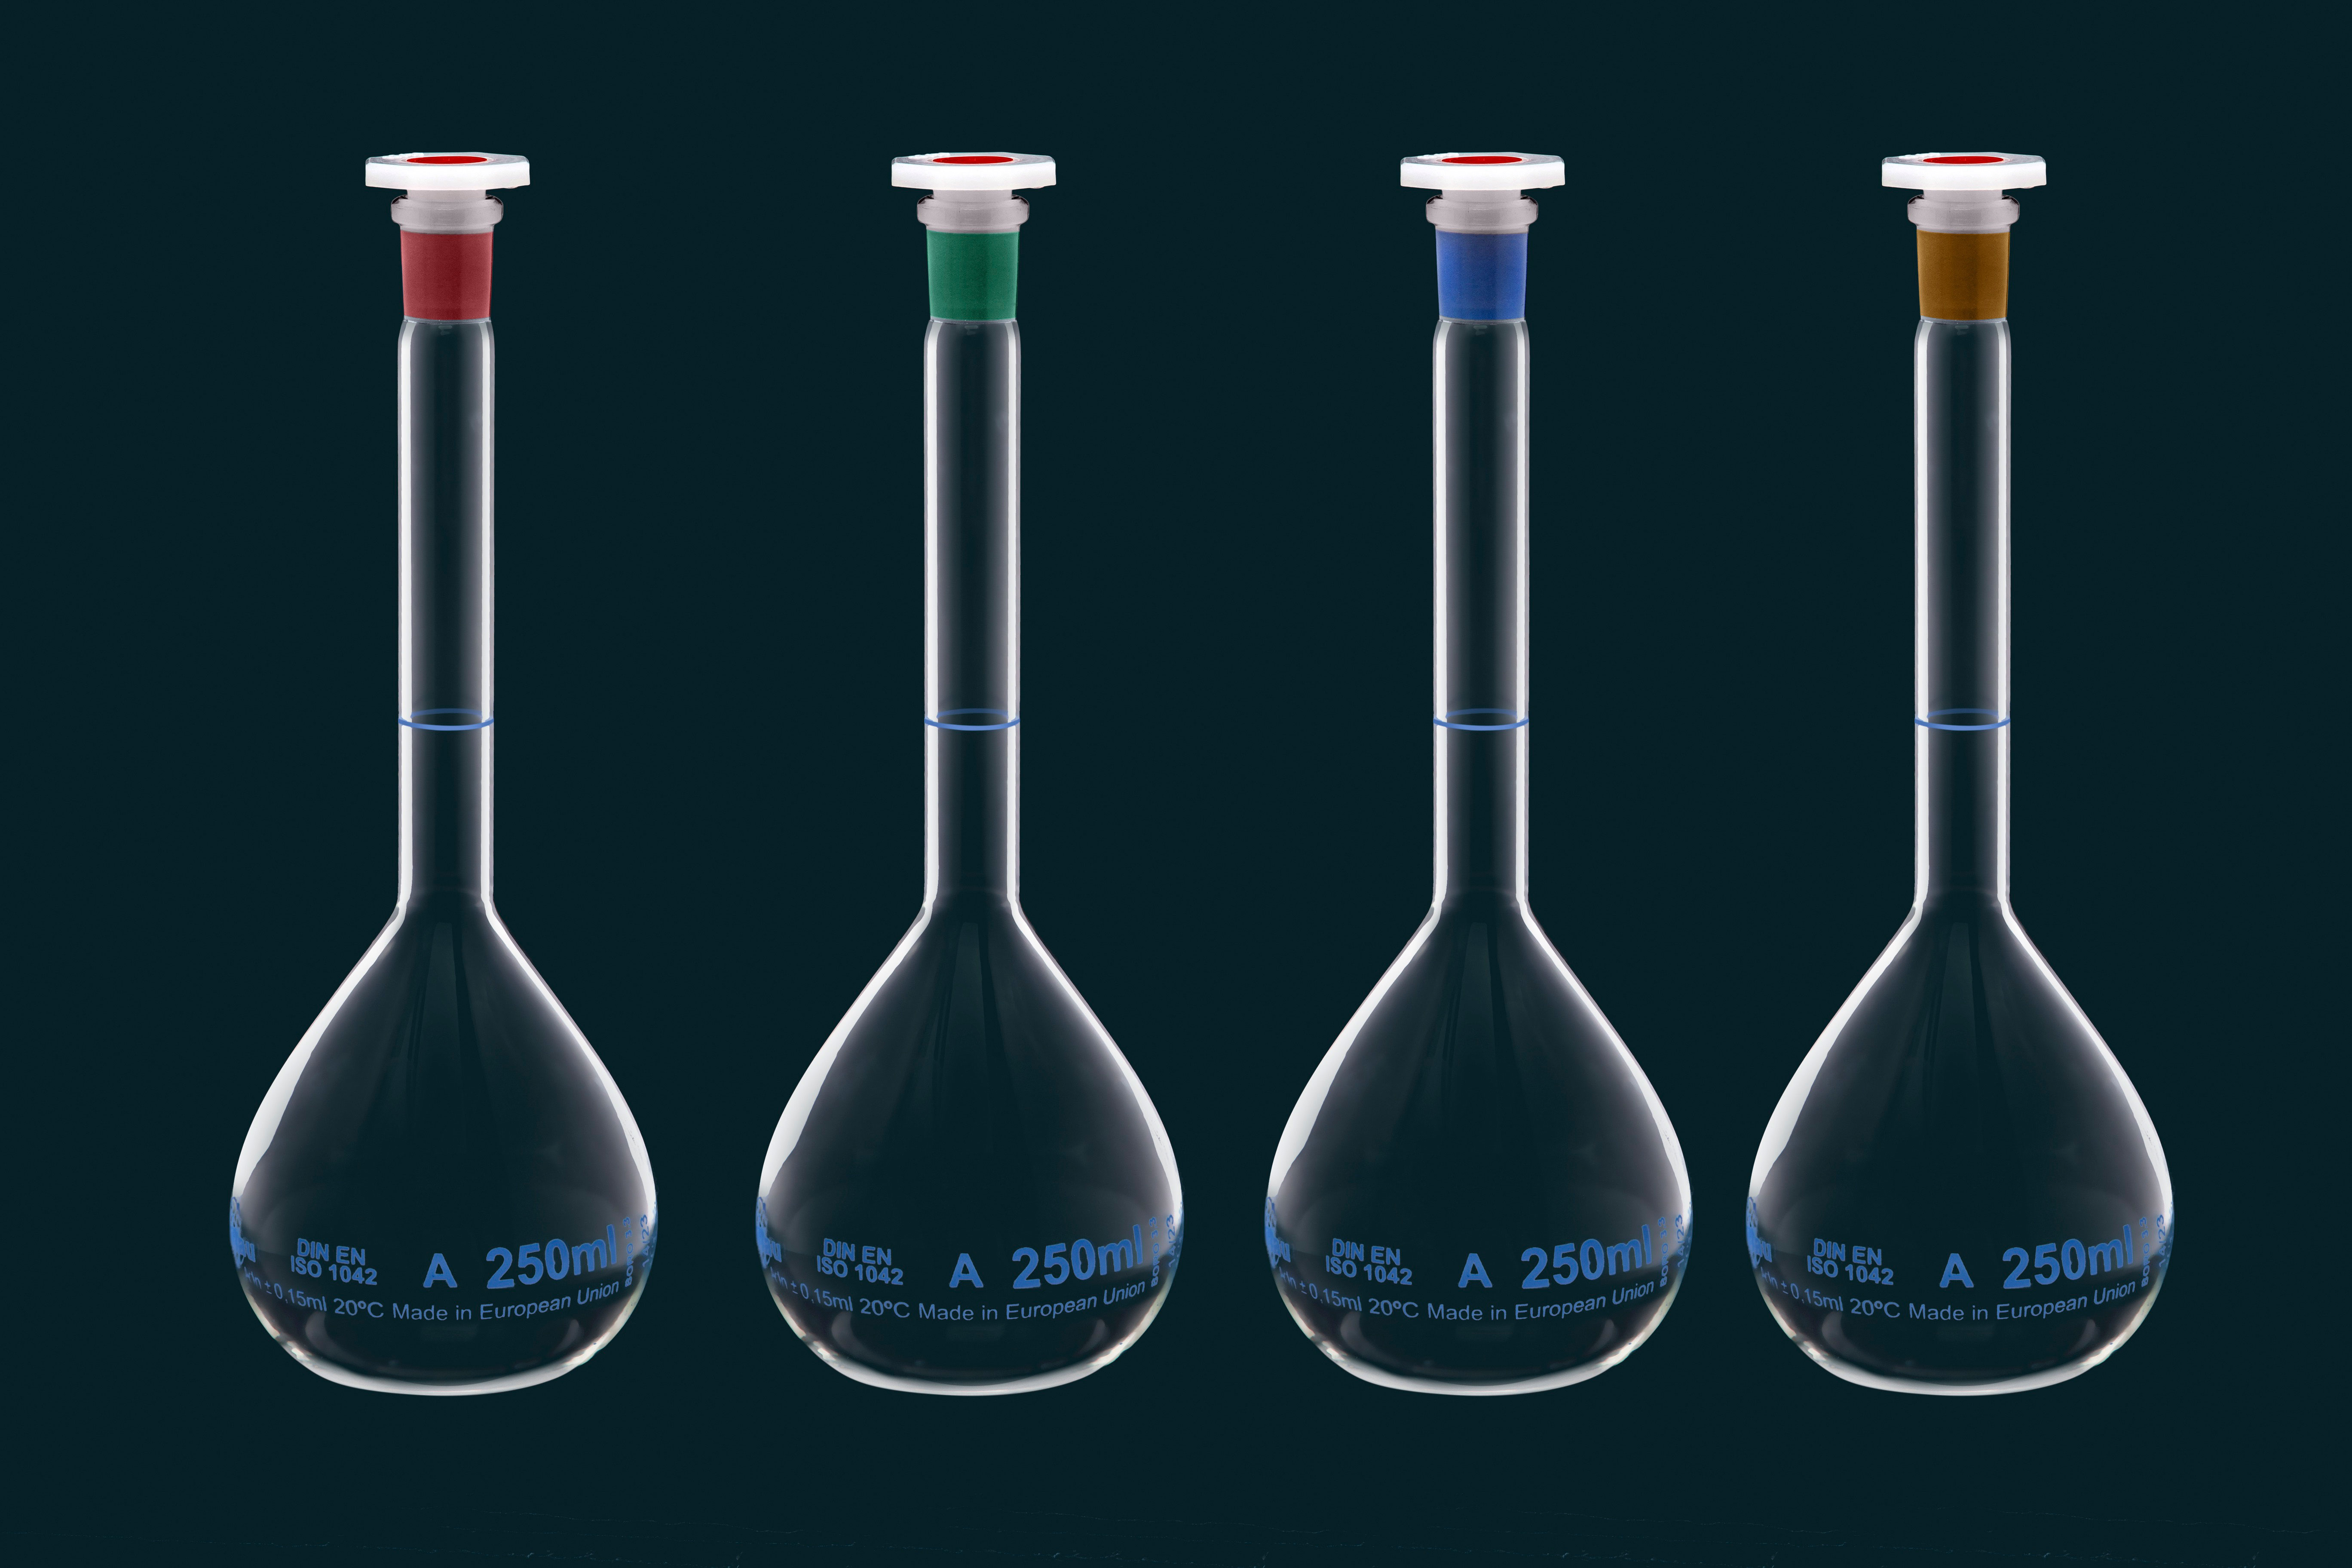 Volumetric flask with green neck, Class A, 50ml, with PE stopper, lot number and certificate of conformity